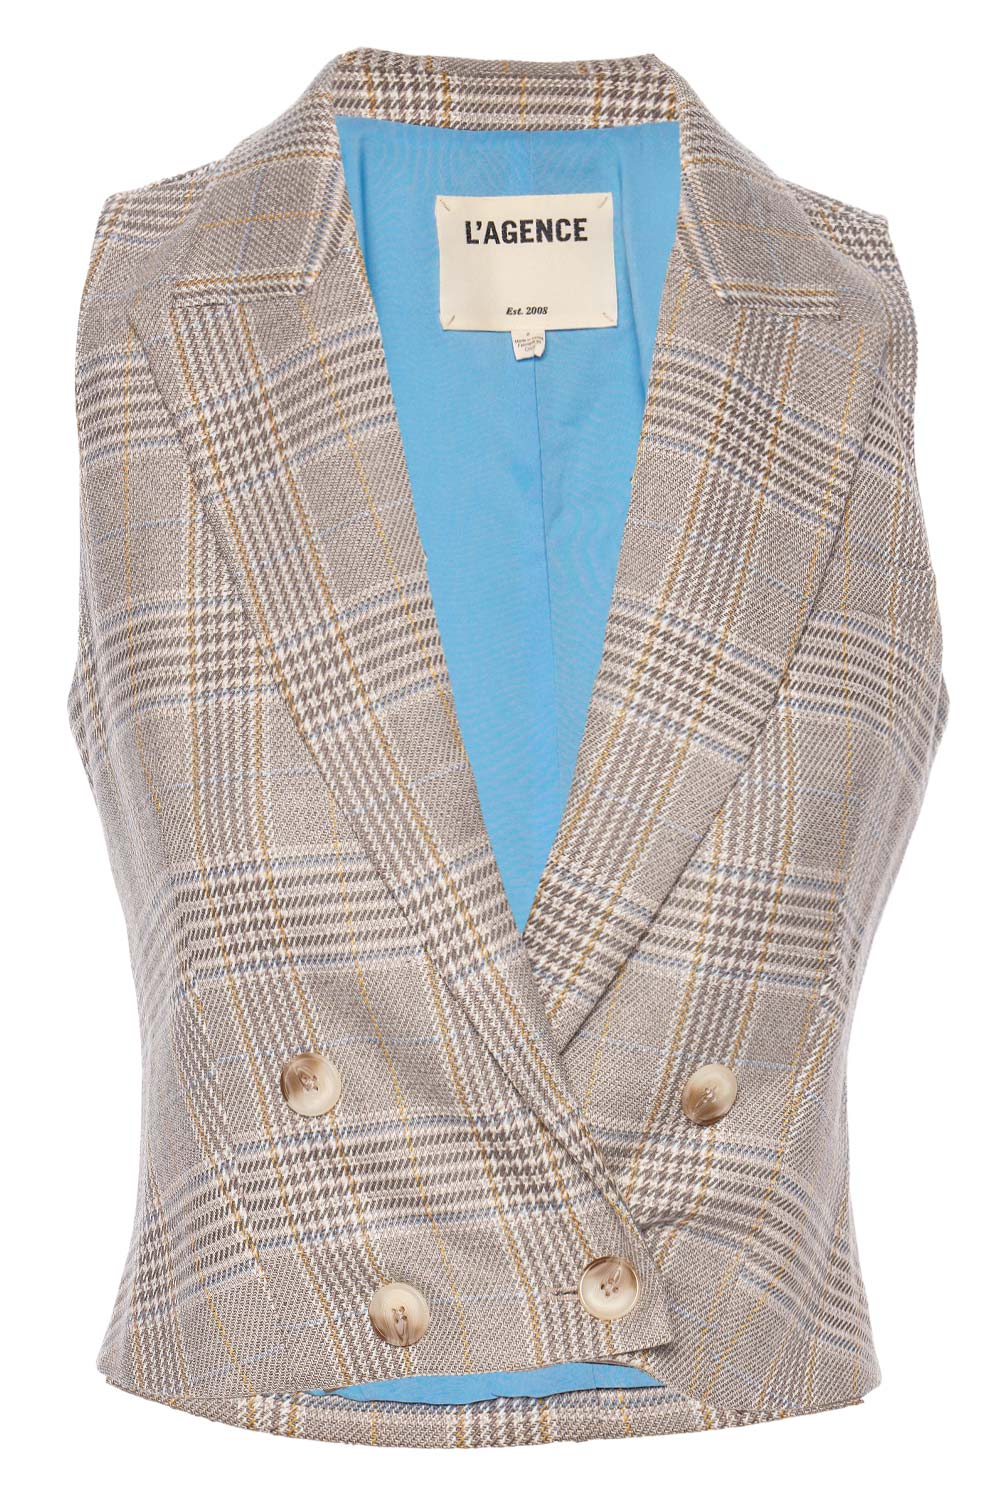 L'AGENCE FABLE DBL BREASTED VEST 1690NOR IVORY/NEUTRAL MULTI